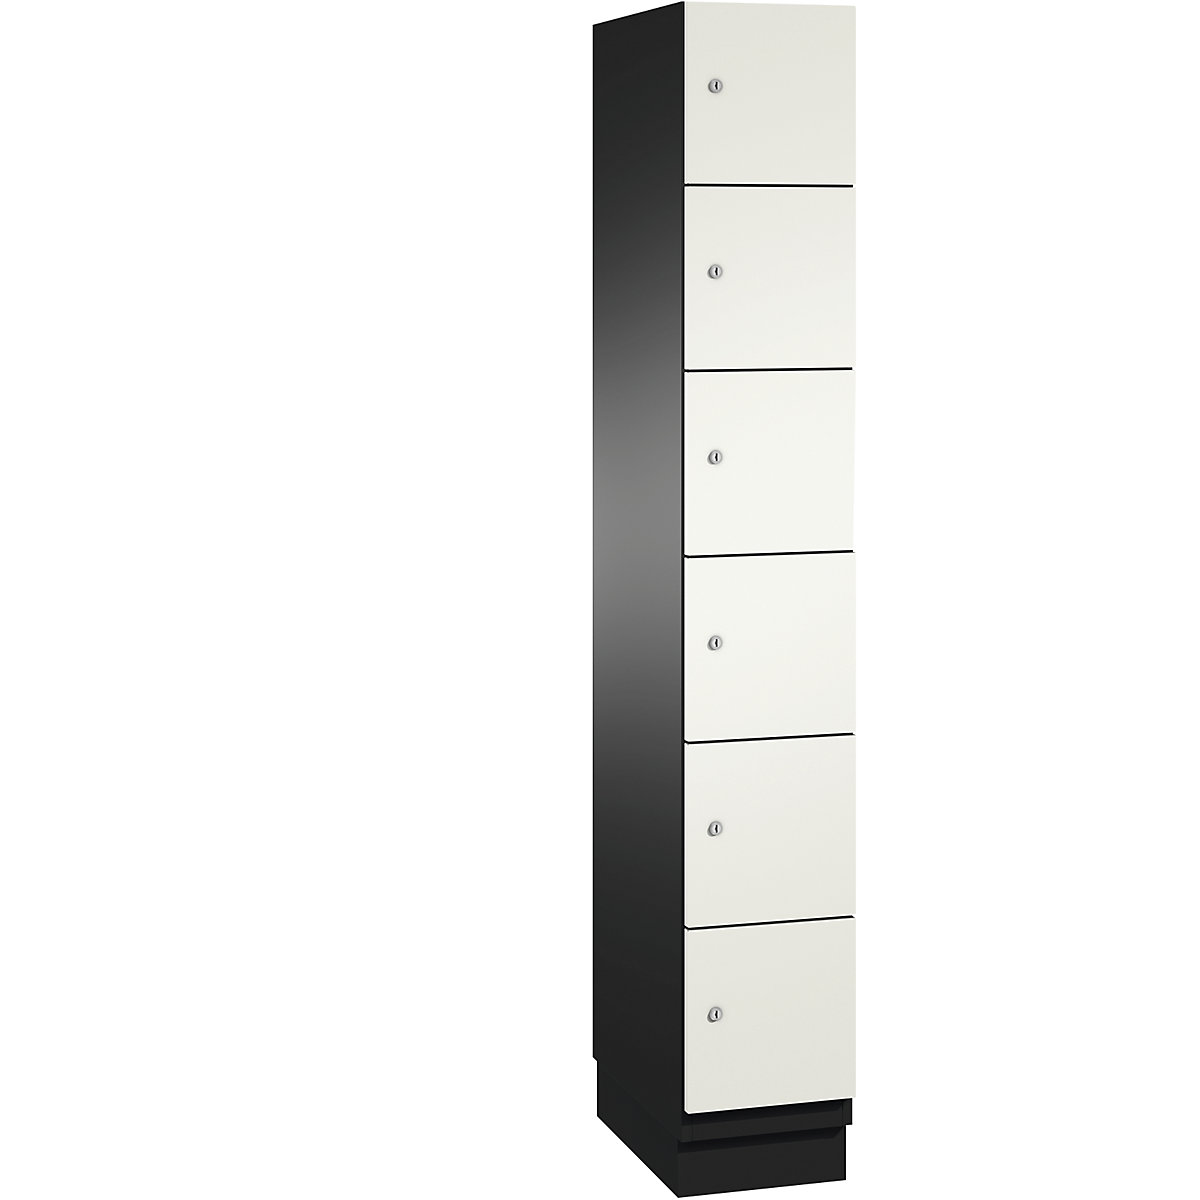 CAMBIO compartment locker with sheet steel doors – C+P, 6 compartments, width 300 mm, body black grey / door pure white-2